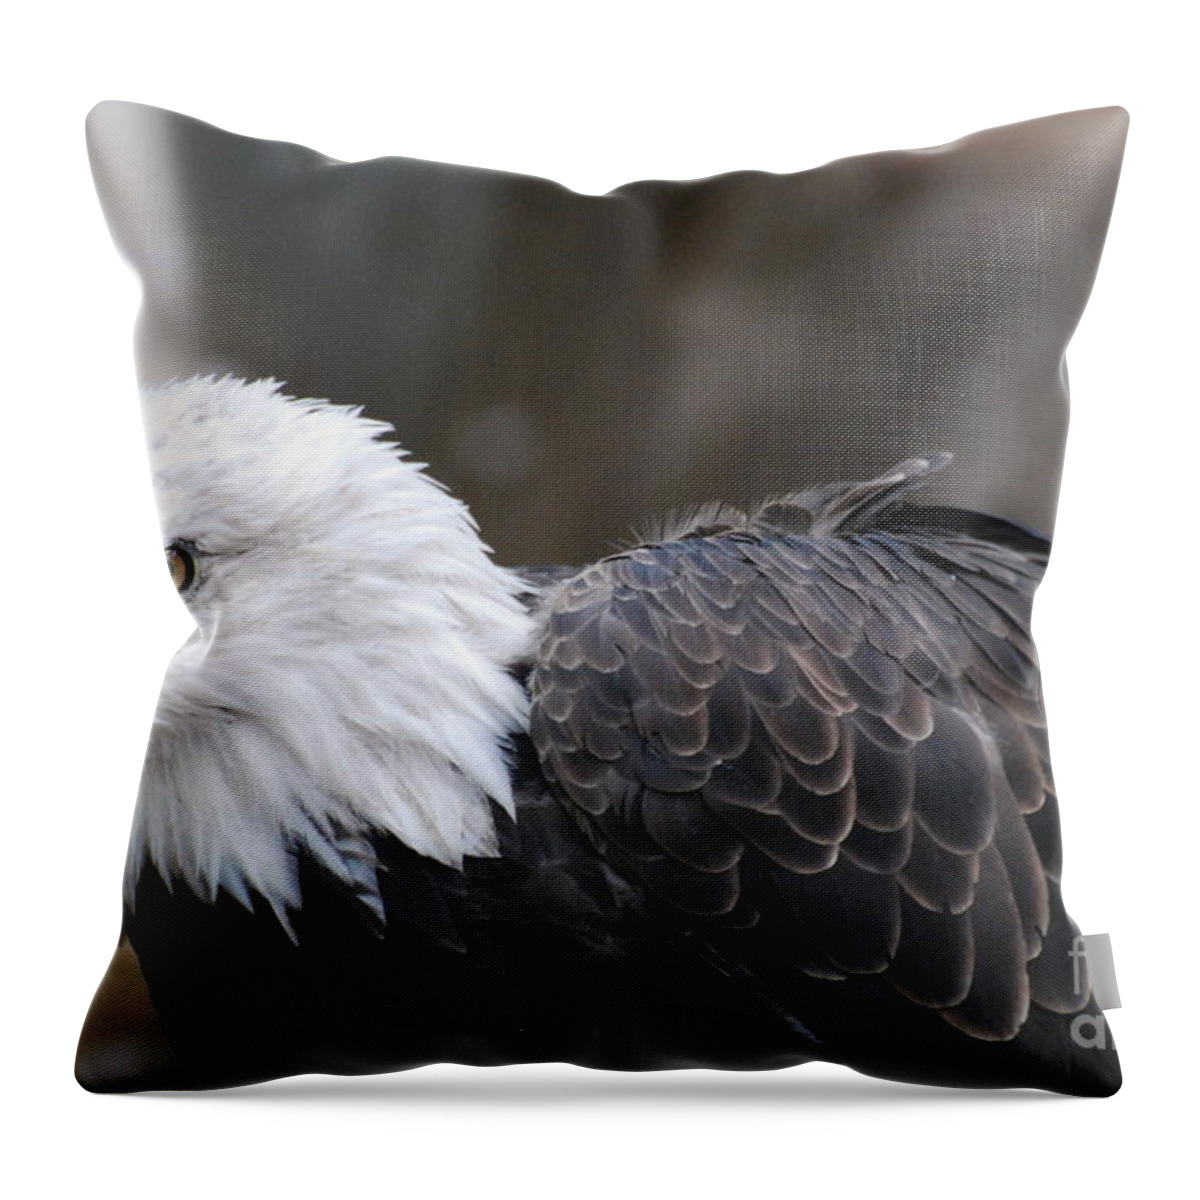 Eagle Throw Pillow featuring the photograph Eagle with Ruffled Feathers by DejaVu Designs